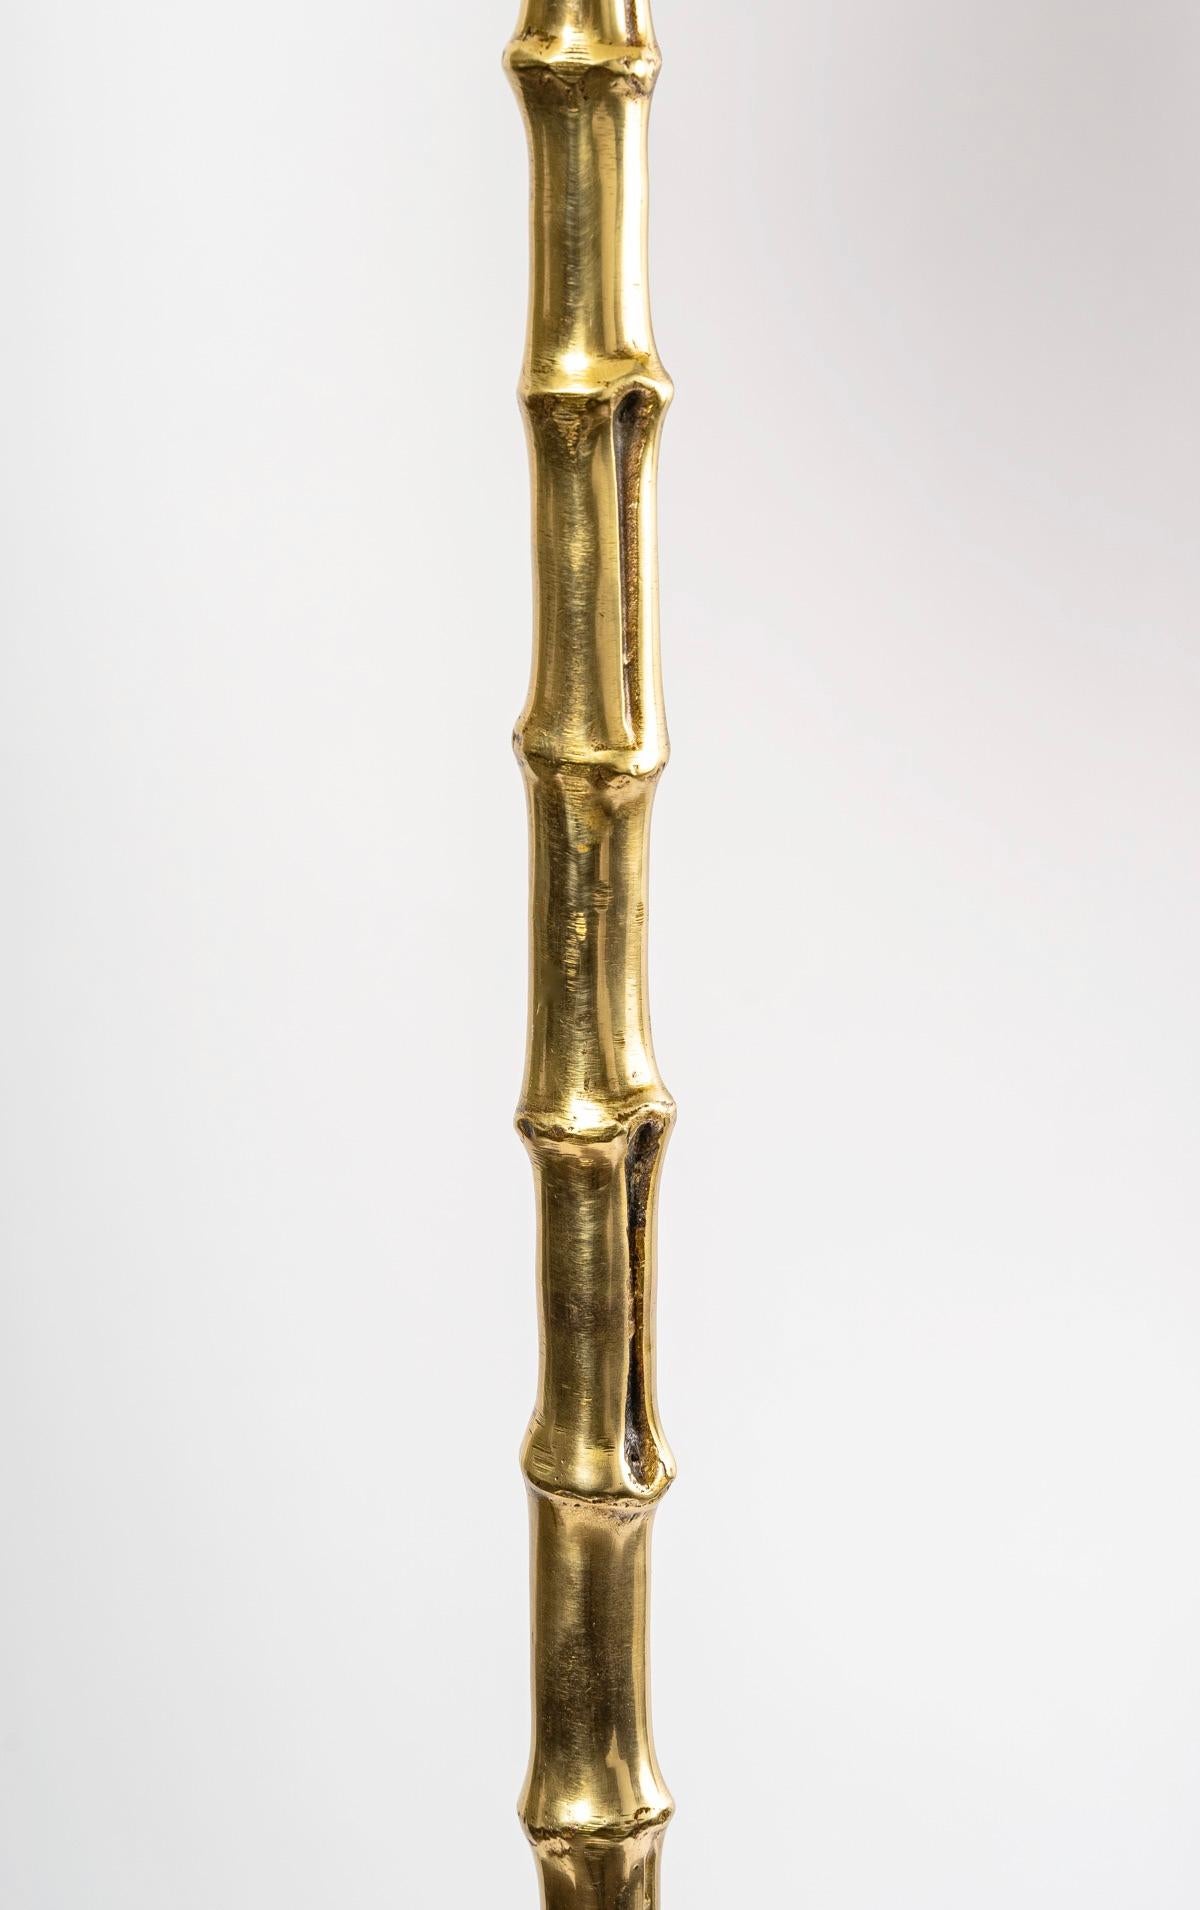 Composed of a large central rod placed on a tripod on the model of the bamboo rod in gilded bronze.
It is dressed in a cylindrical-shaped lampshade in off-white cotton, redone identically.
1 arm of light.